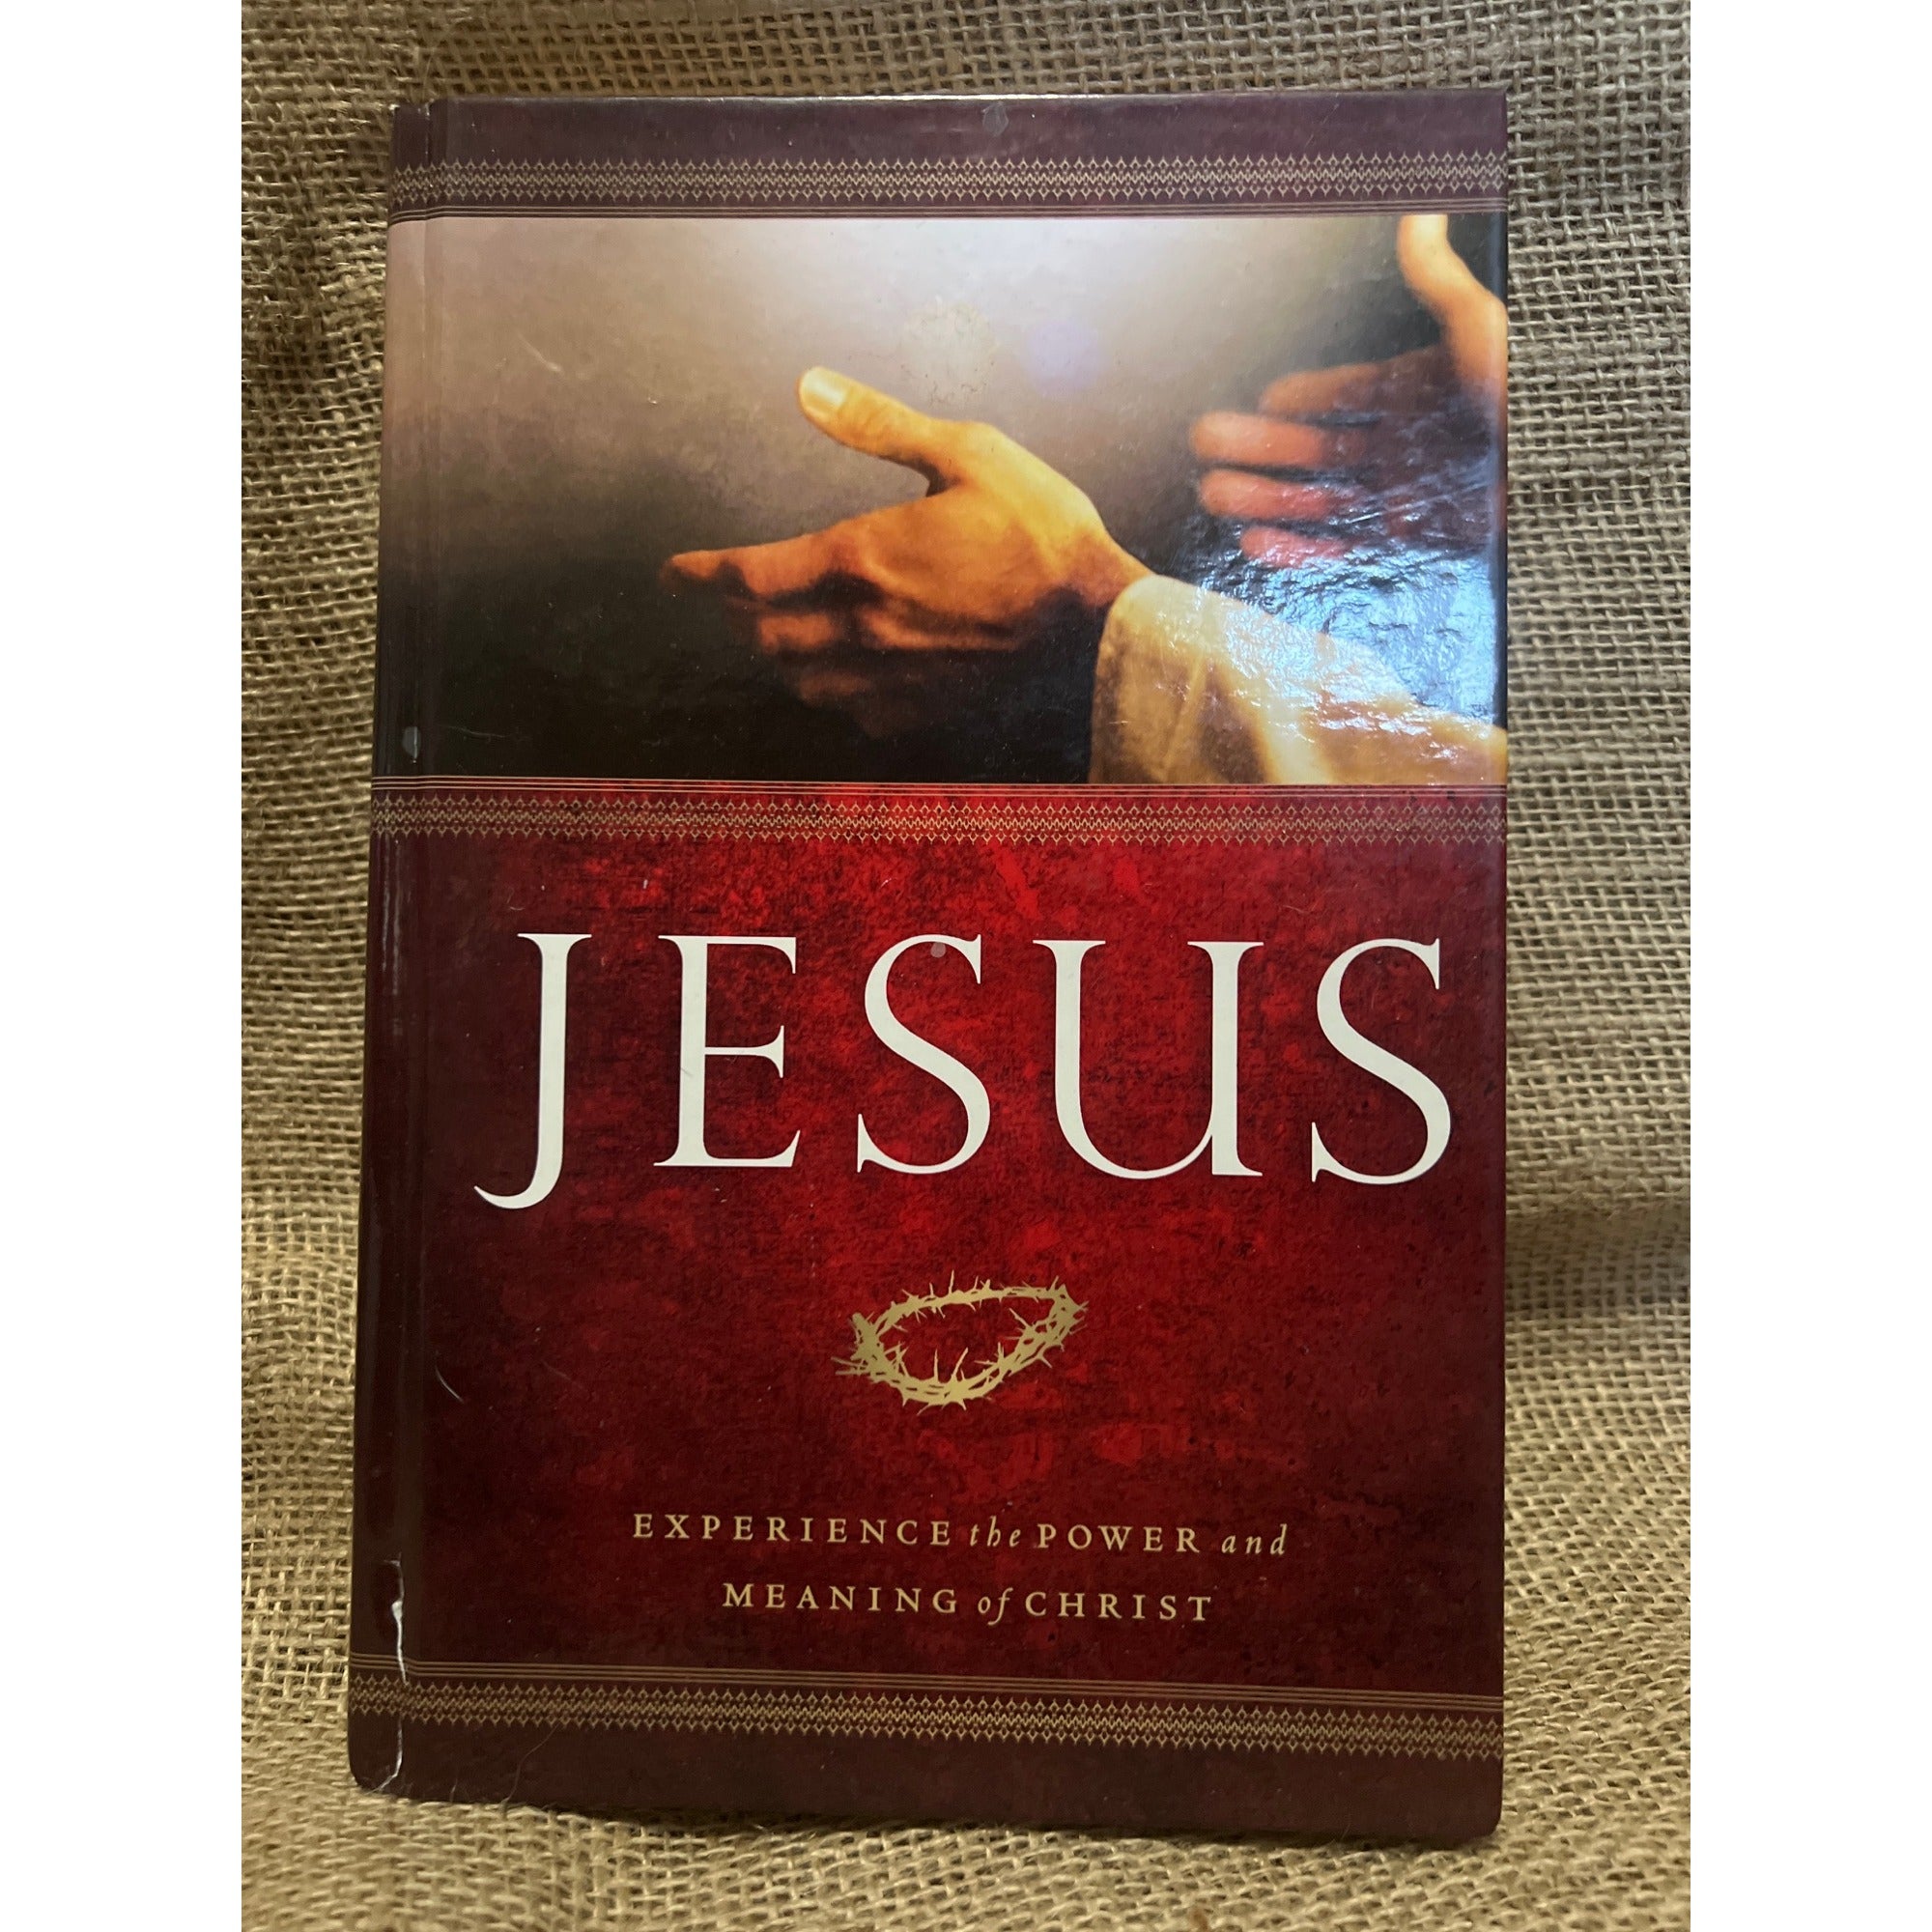 "Jesus: Experience the Power and Meaning of Christ" Daily Devotional by Thomas Nelson Publishers